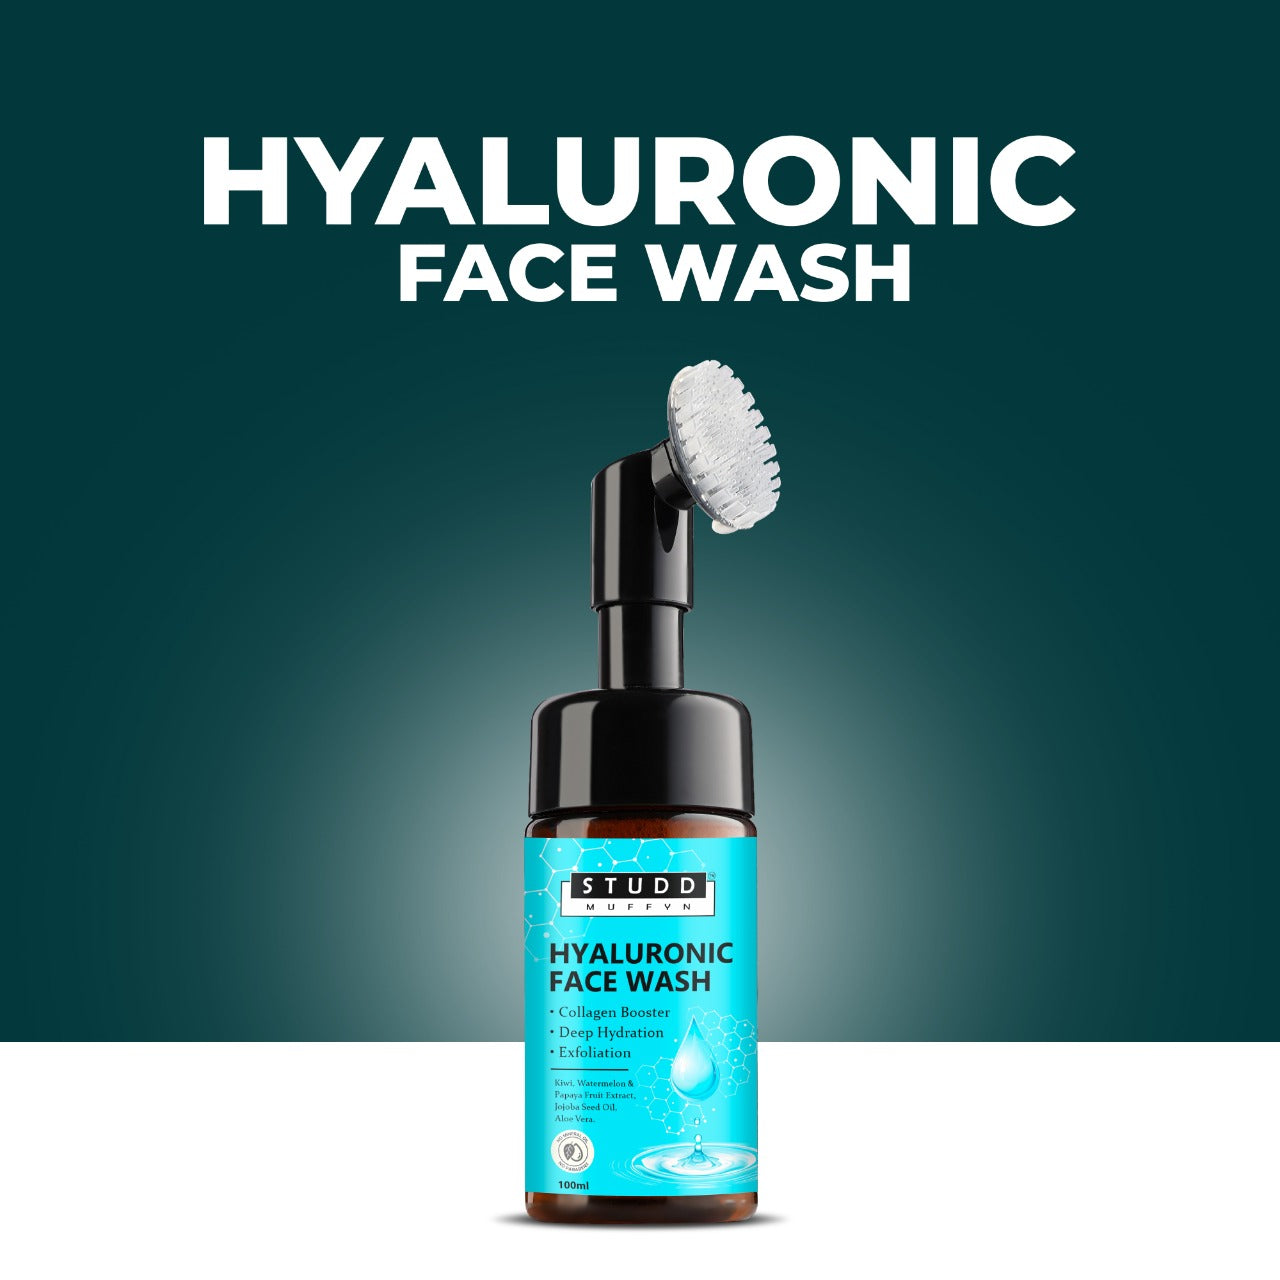 Studd Muffyn Hyaluronic Foaming Face Wash for Remove Impurities, toxins & Bacteria -100ml